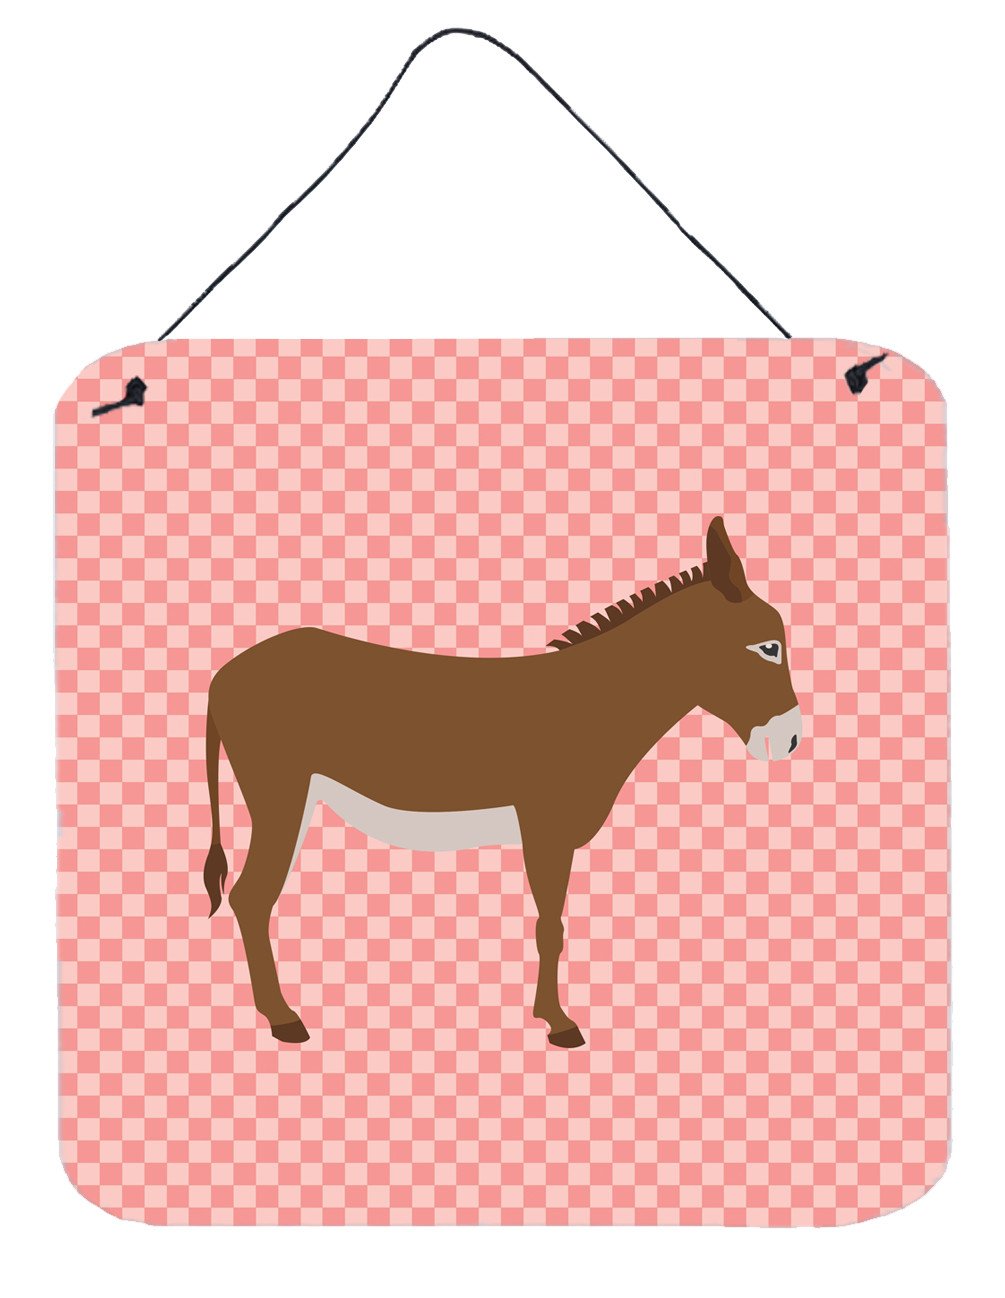 Cotentin Donkey Pink Check Wall or Door Hanging Prints BB7849DS66 by Caroline's Treasures